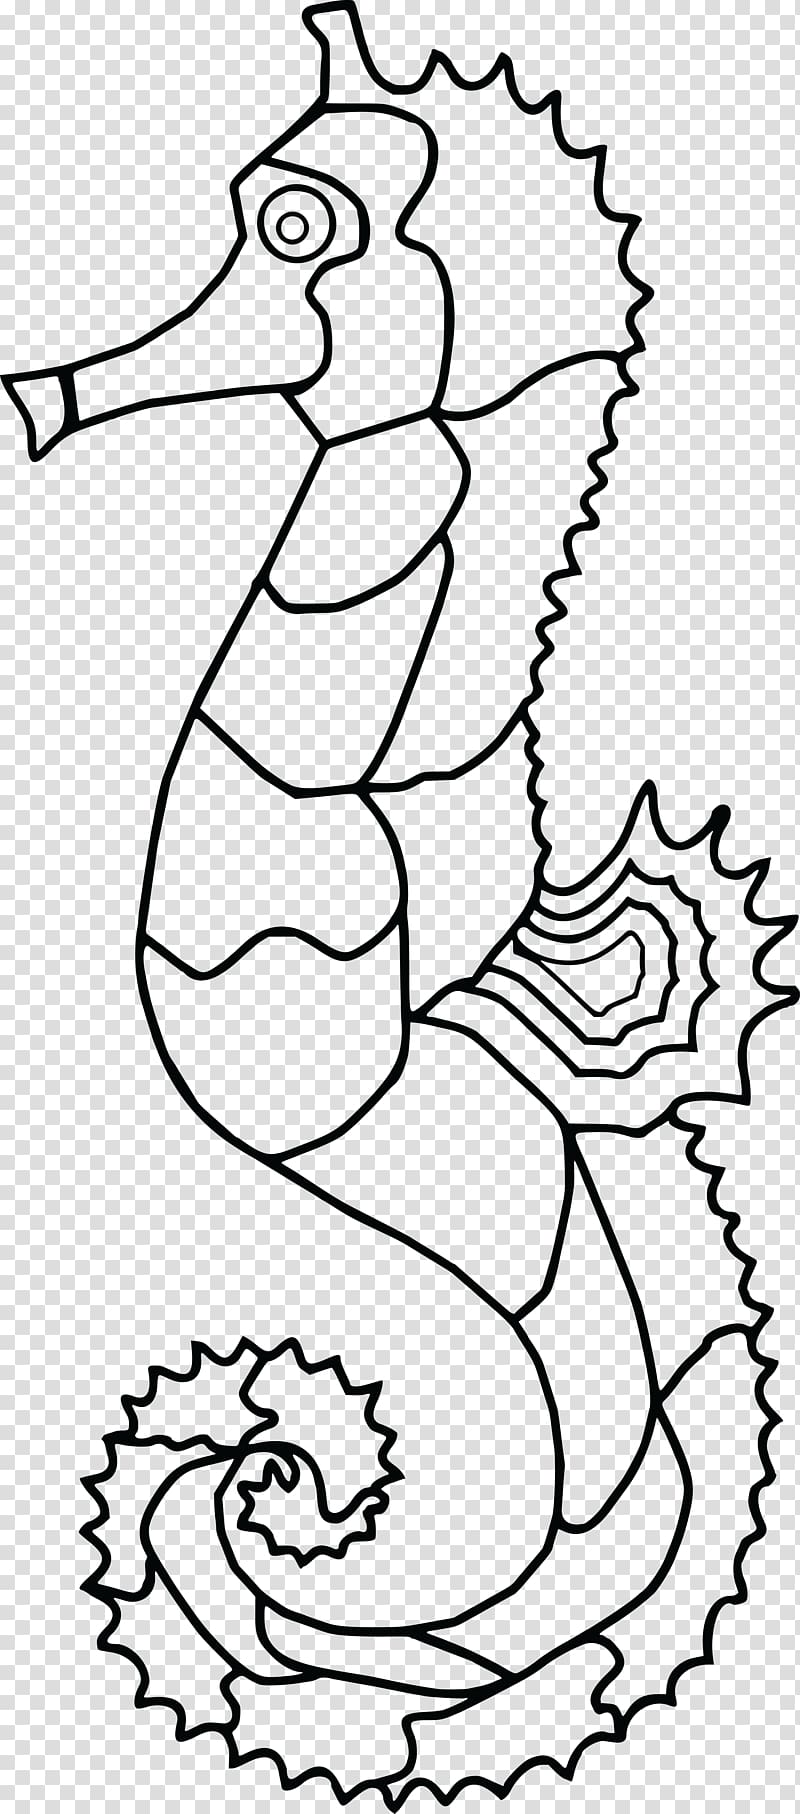 Line art Drawing Coloring book Animal, seahorse transparent background PNG clipart